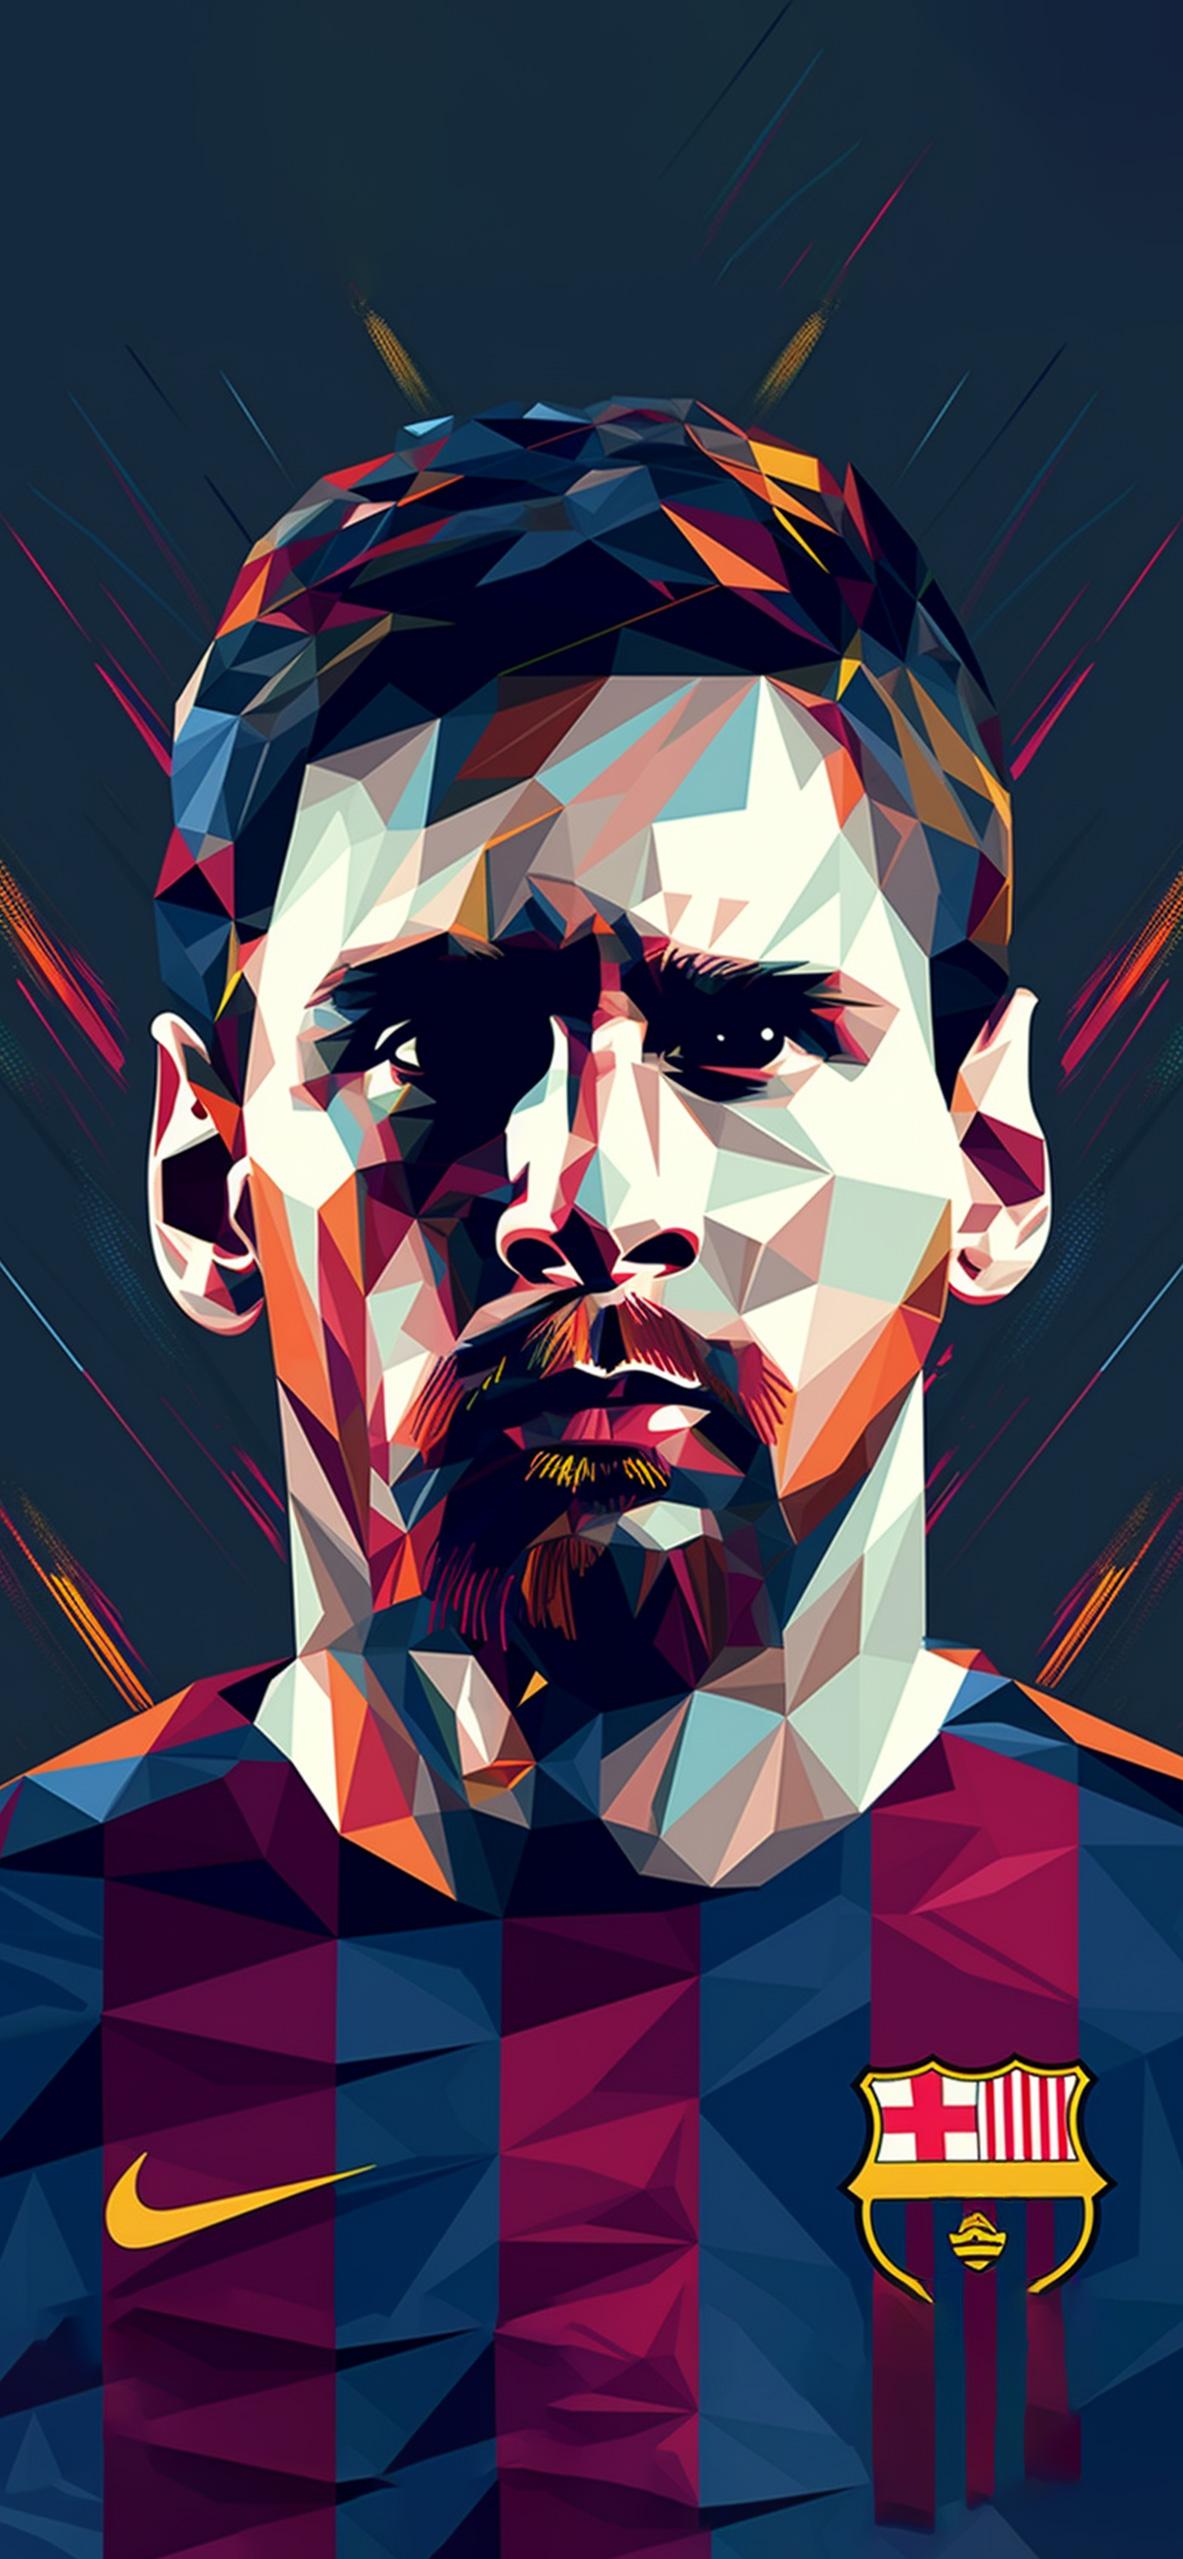 Messi Art Wallpapers Aesthetic Messi Wallpapers for iPhone 4k